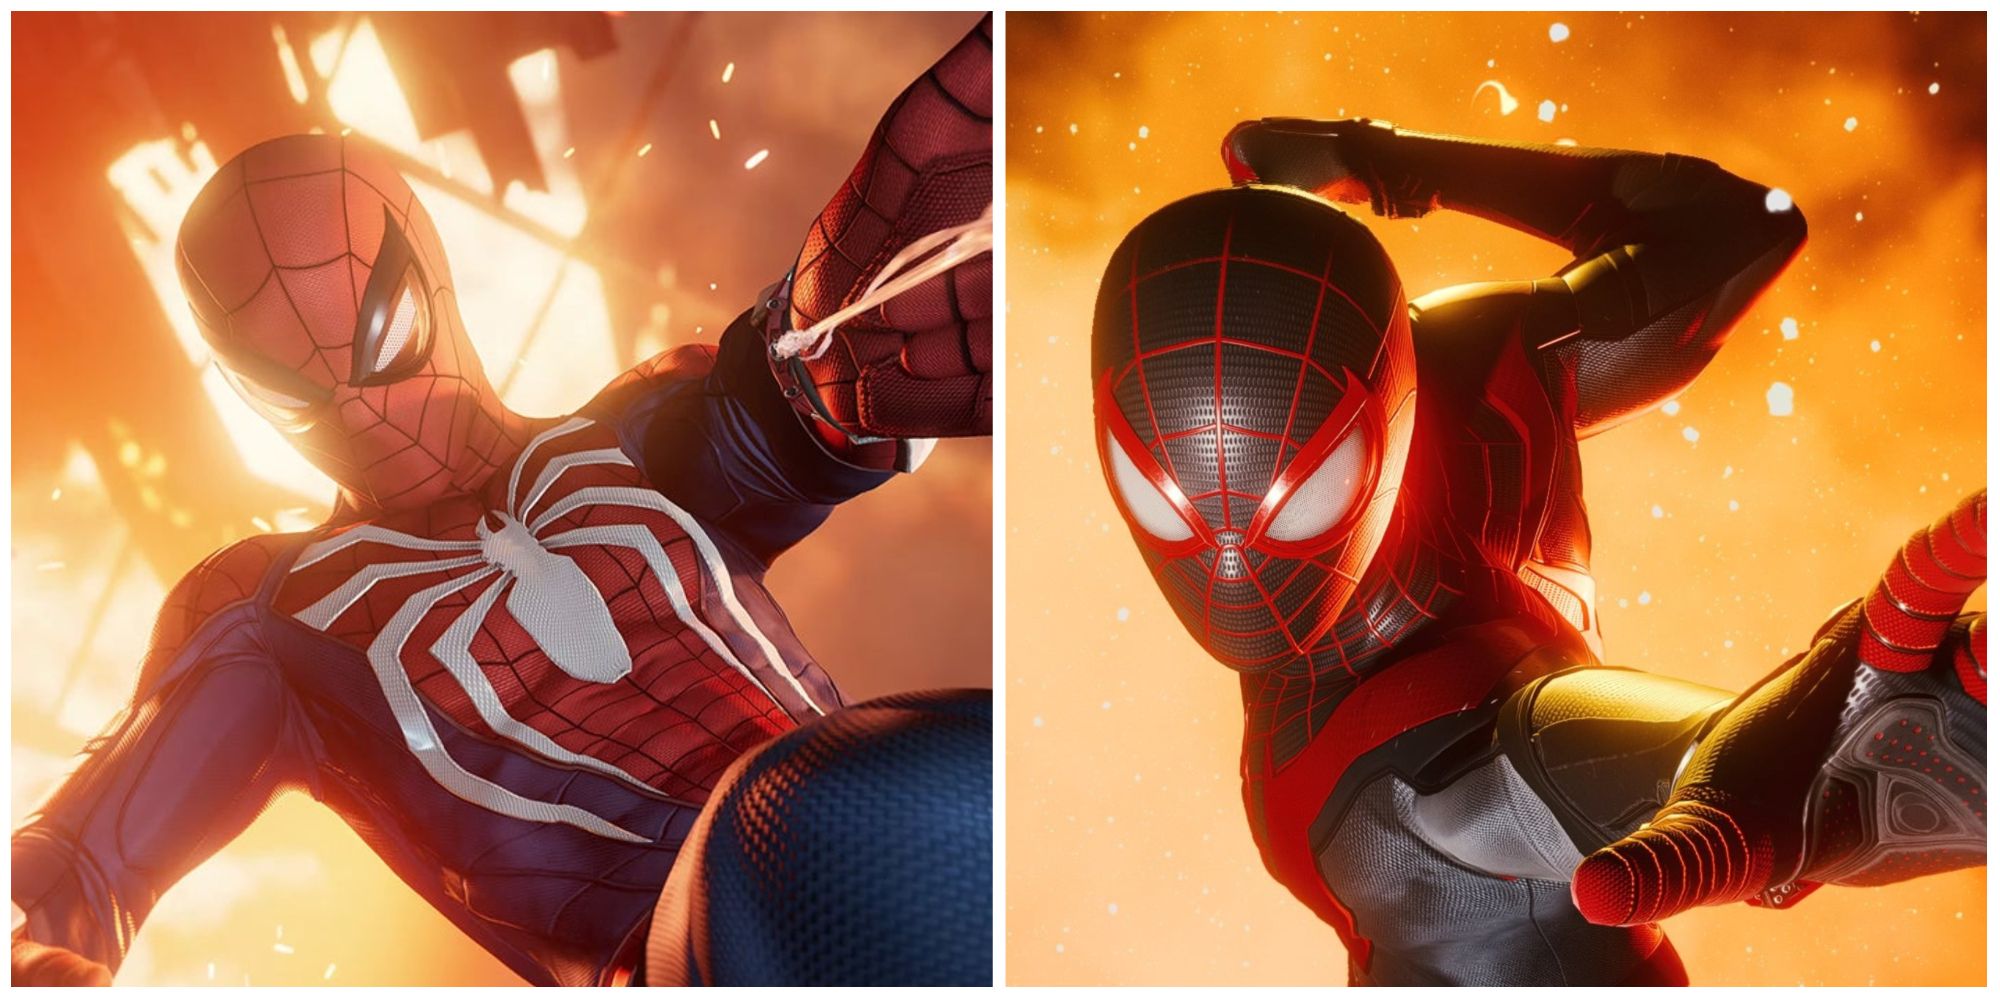 Marvel's Spiderman V. Spiderman: Miles Morales - Which Game Is Better?